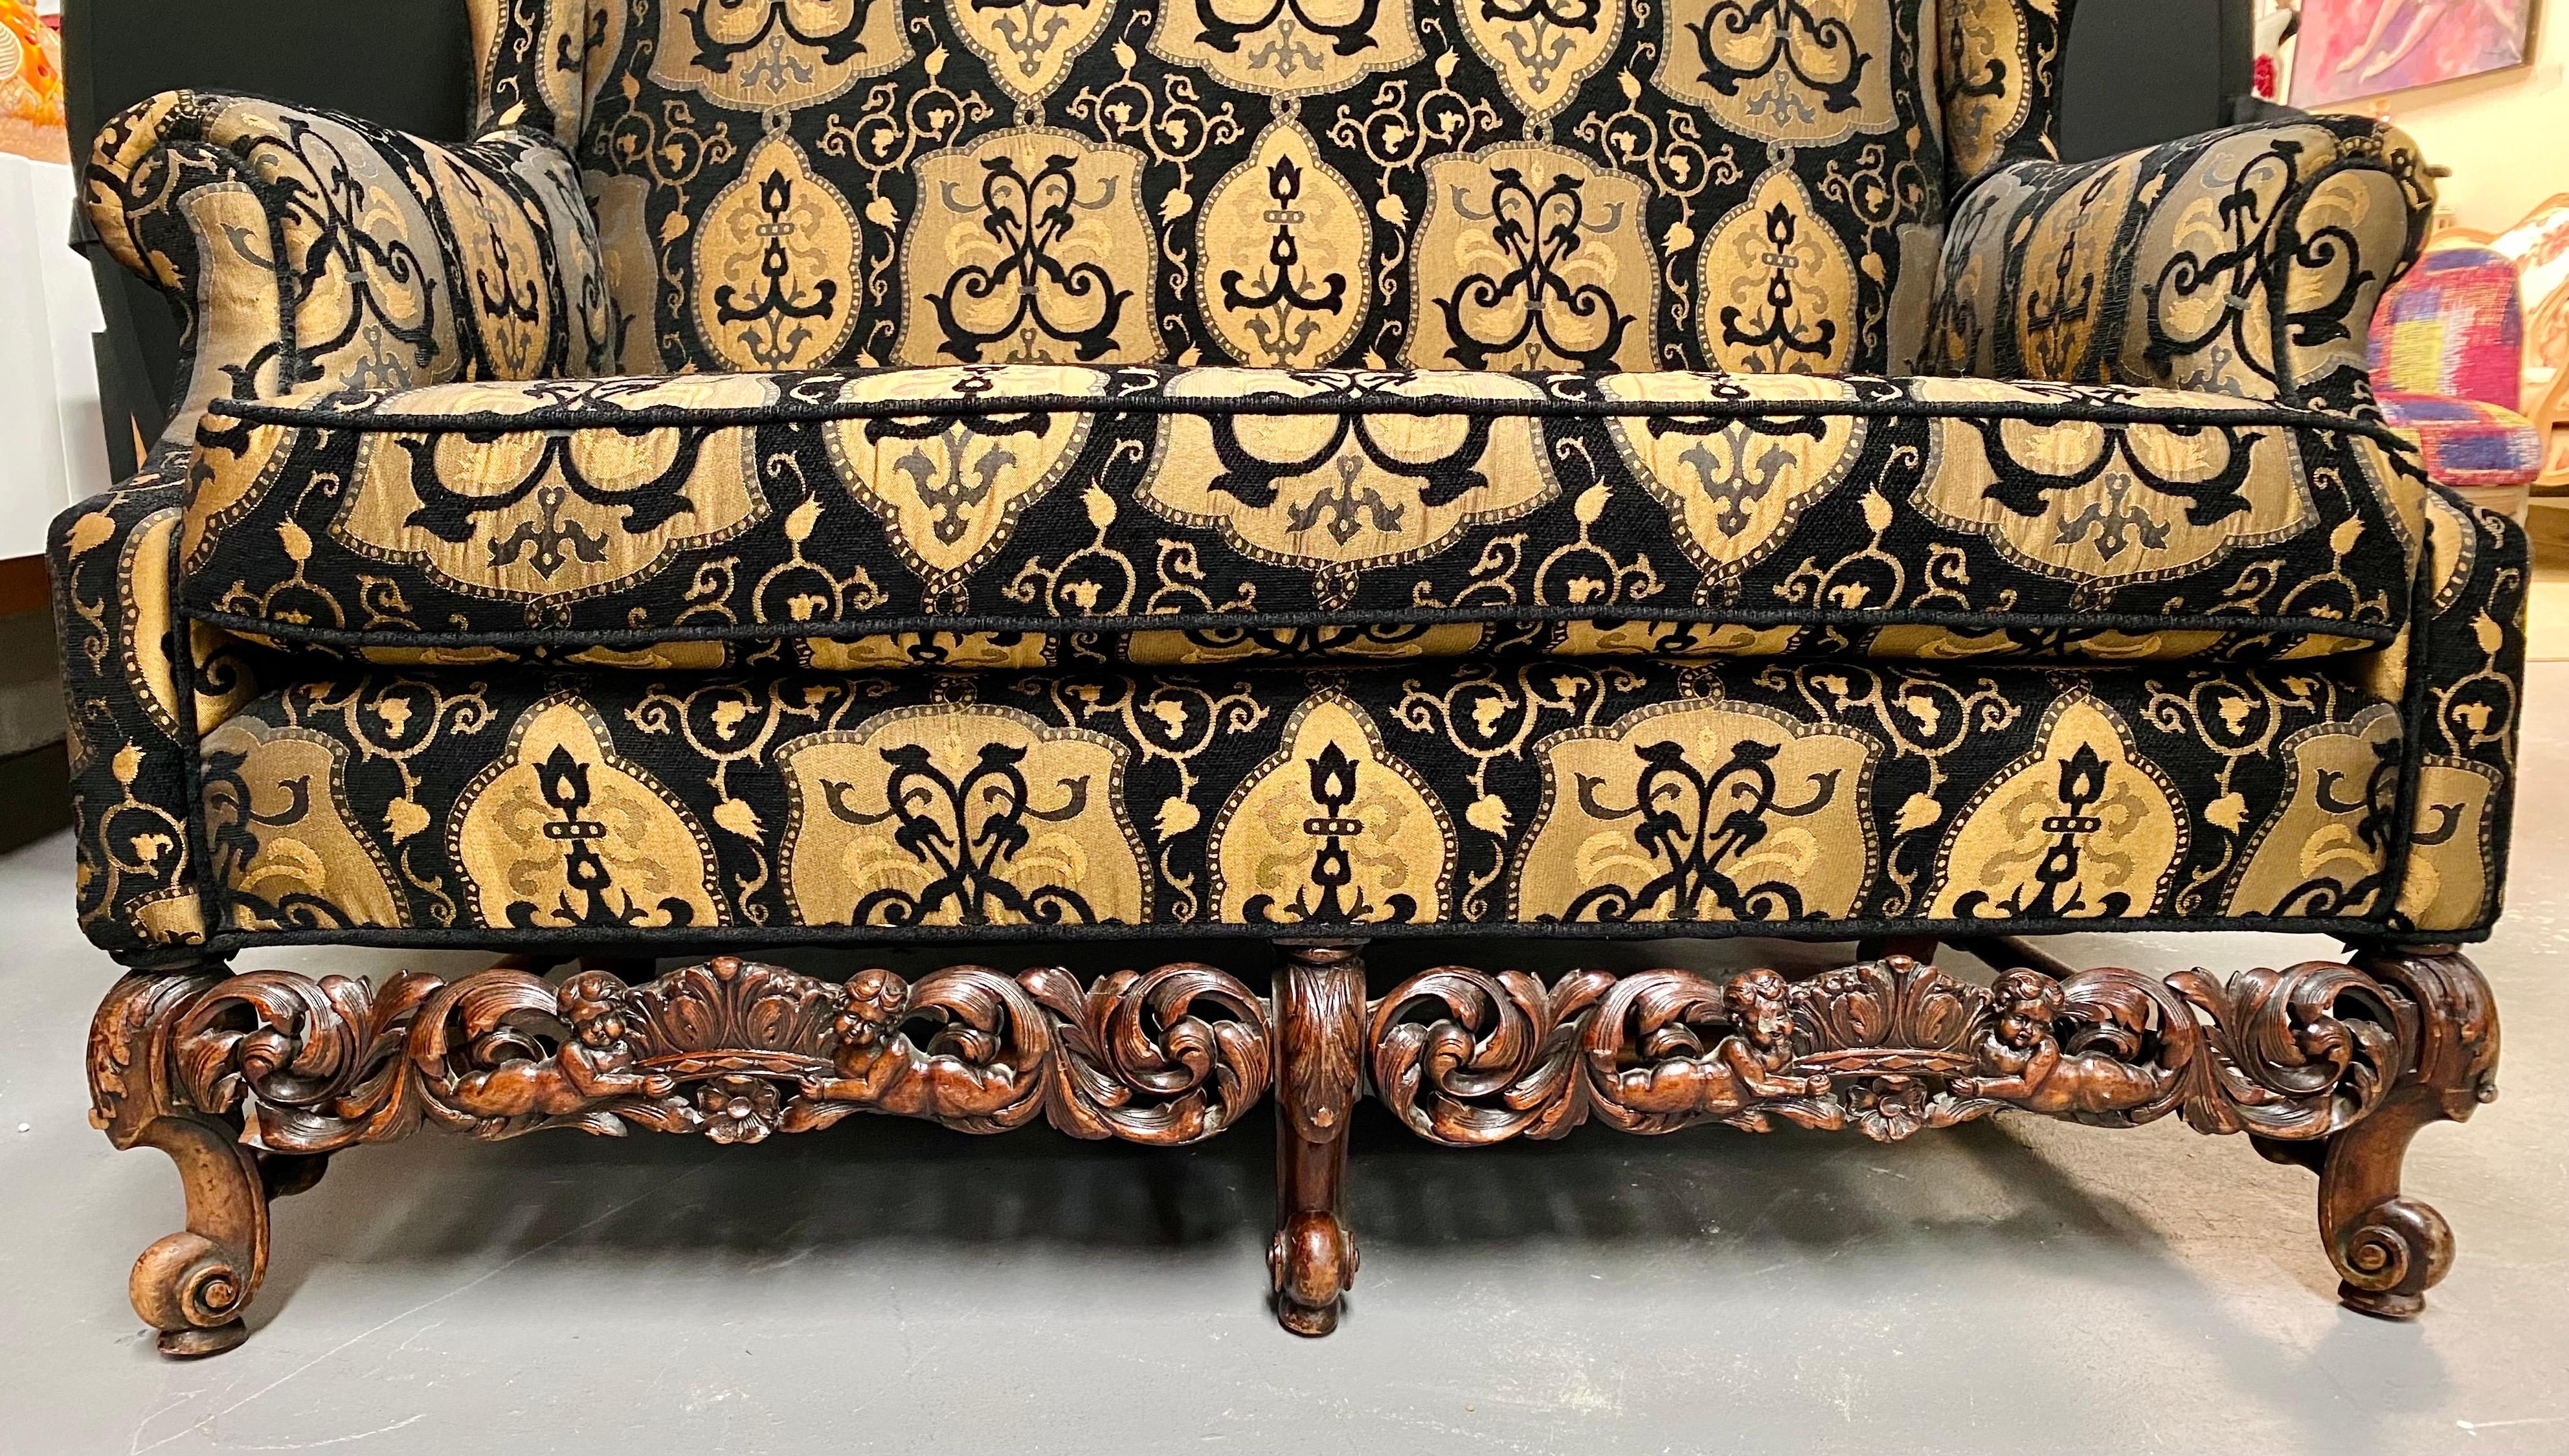 Fabric Italian Rococo Revival Style Settee or Sofa with Heraldic Motif in Black & Beige For Sale